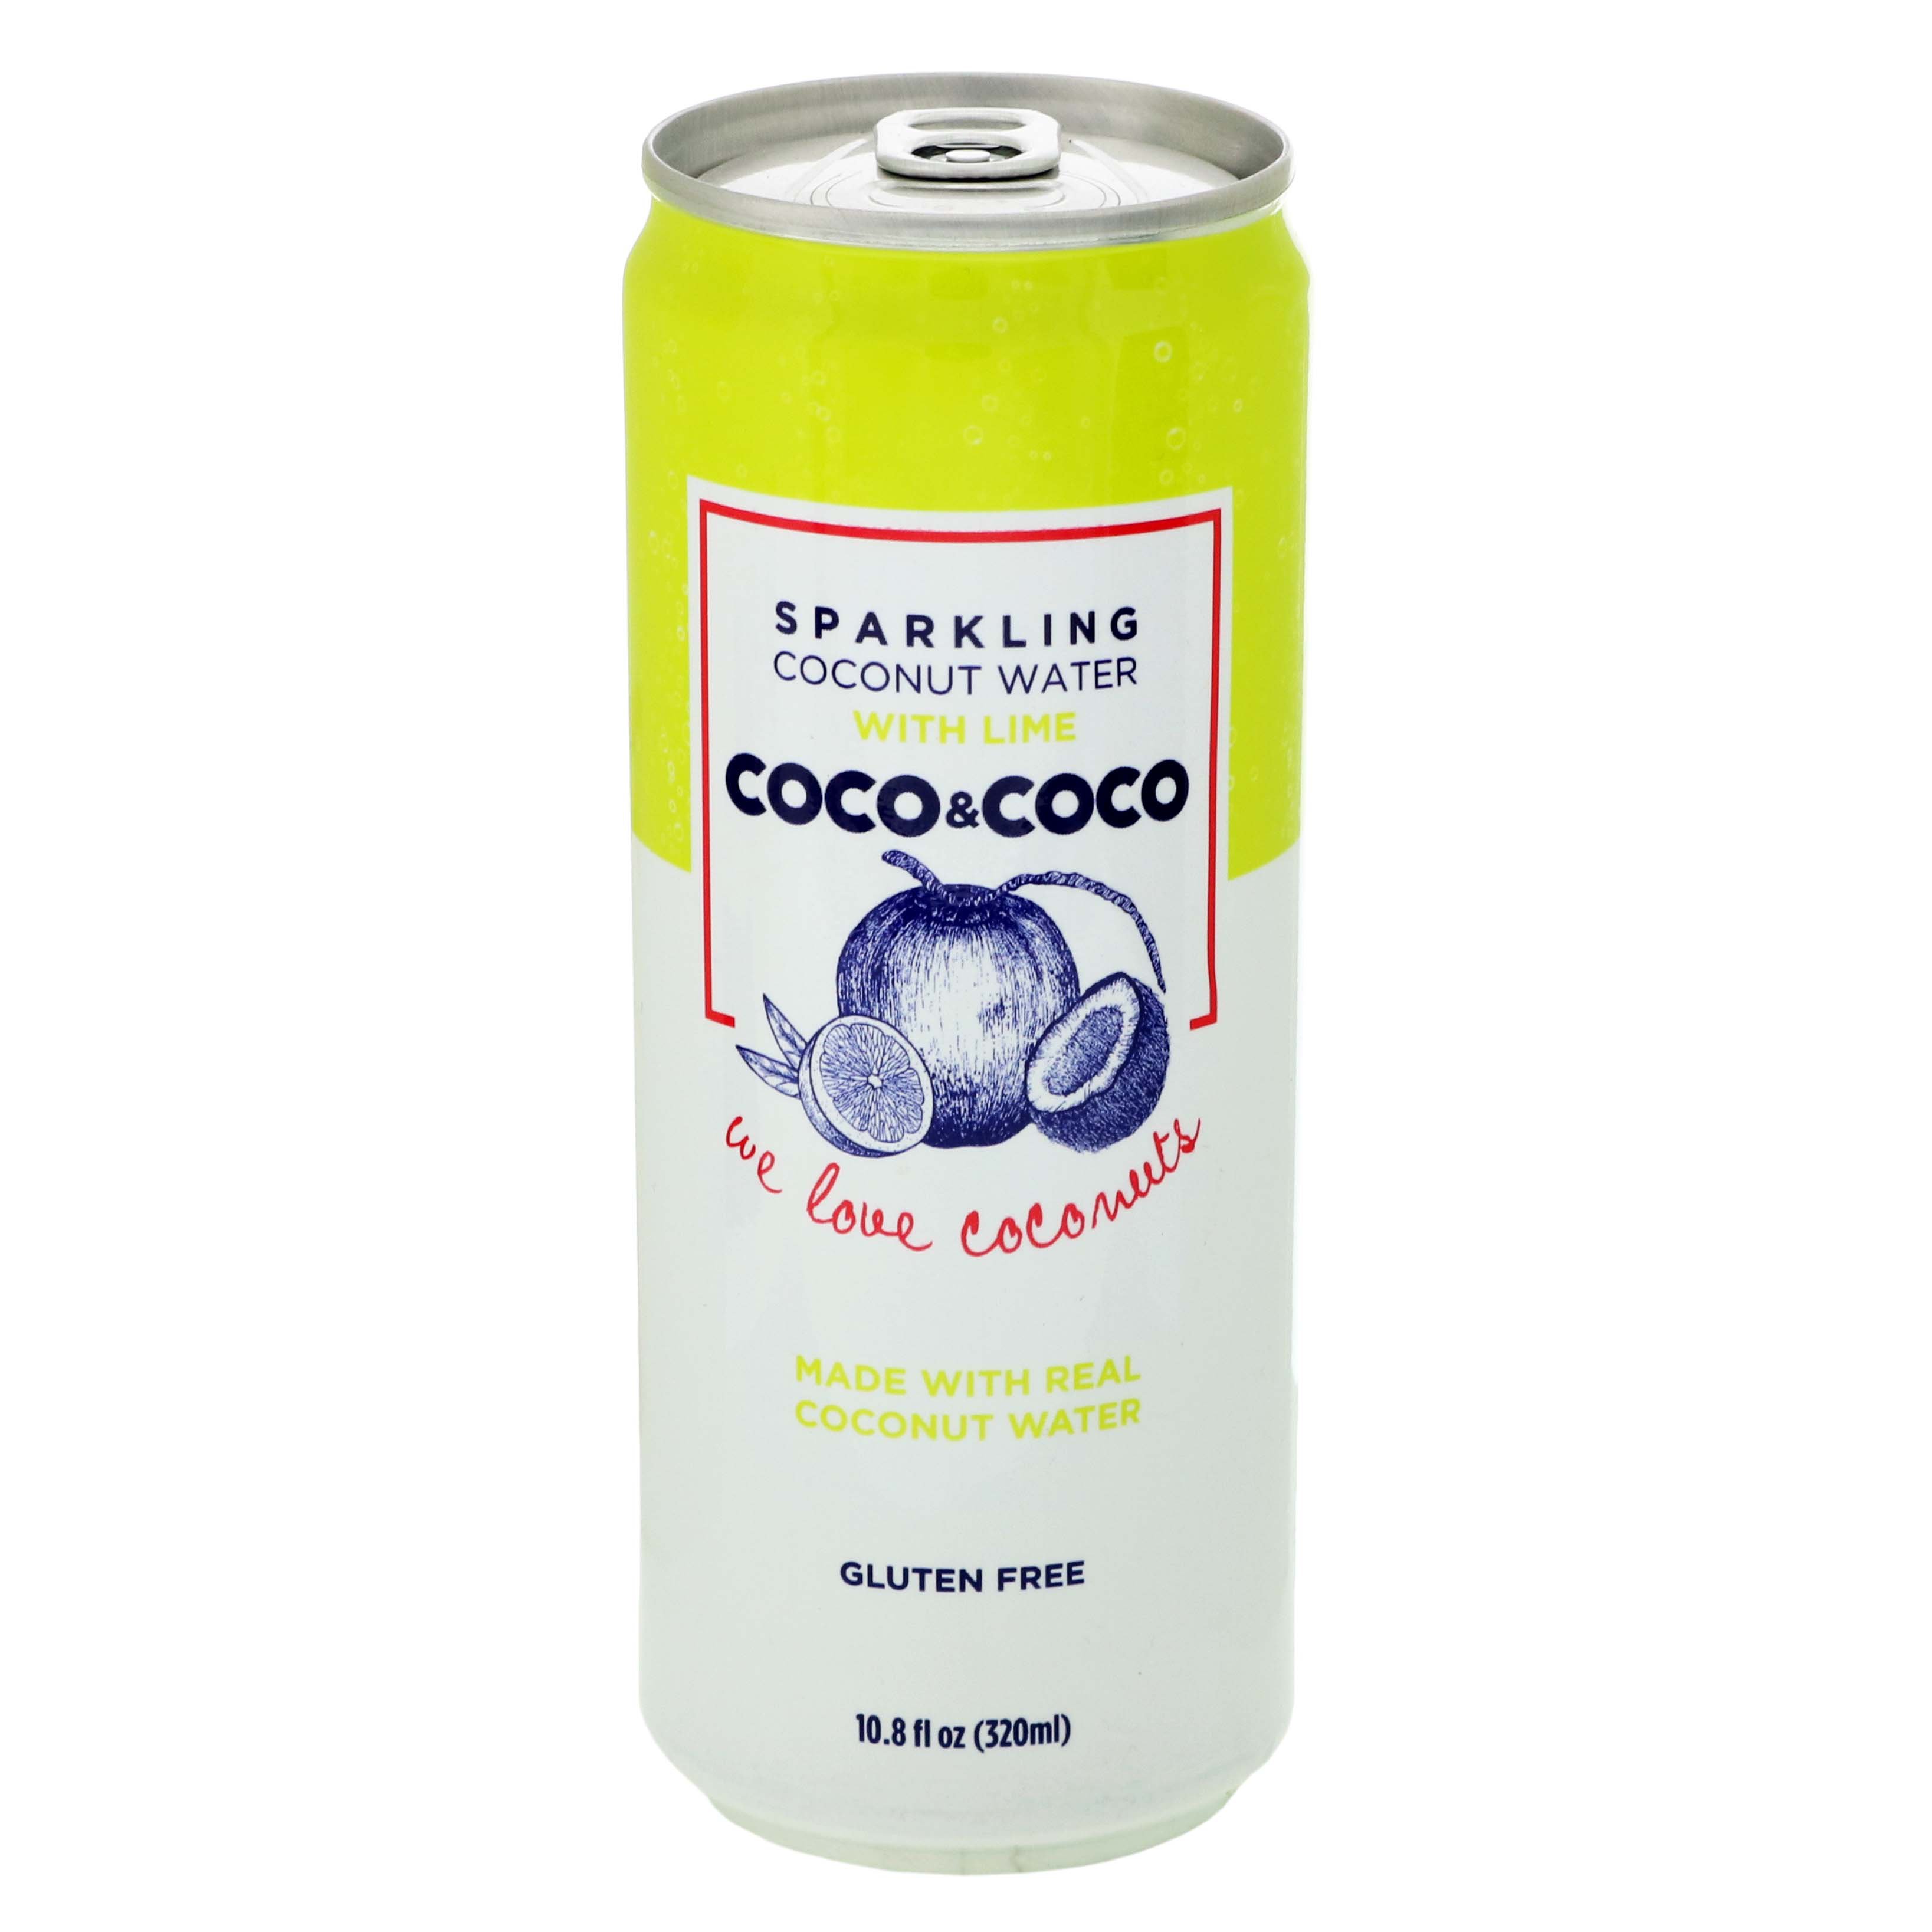 Cocotein Coconut Water Protein - Shop Diet & Fitness at H-E-B